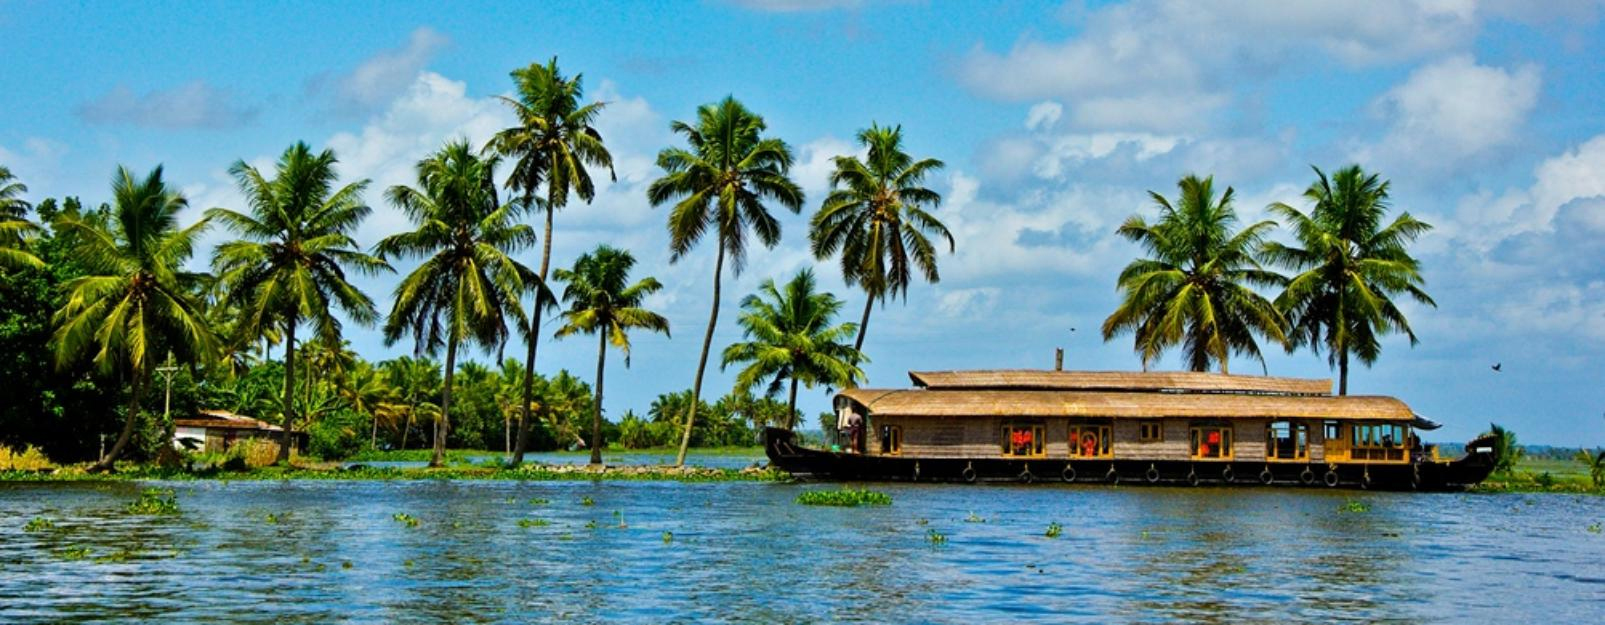 Travel To God's Own Country - Kerala